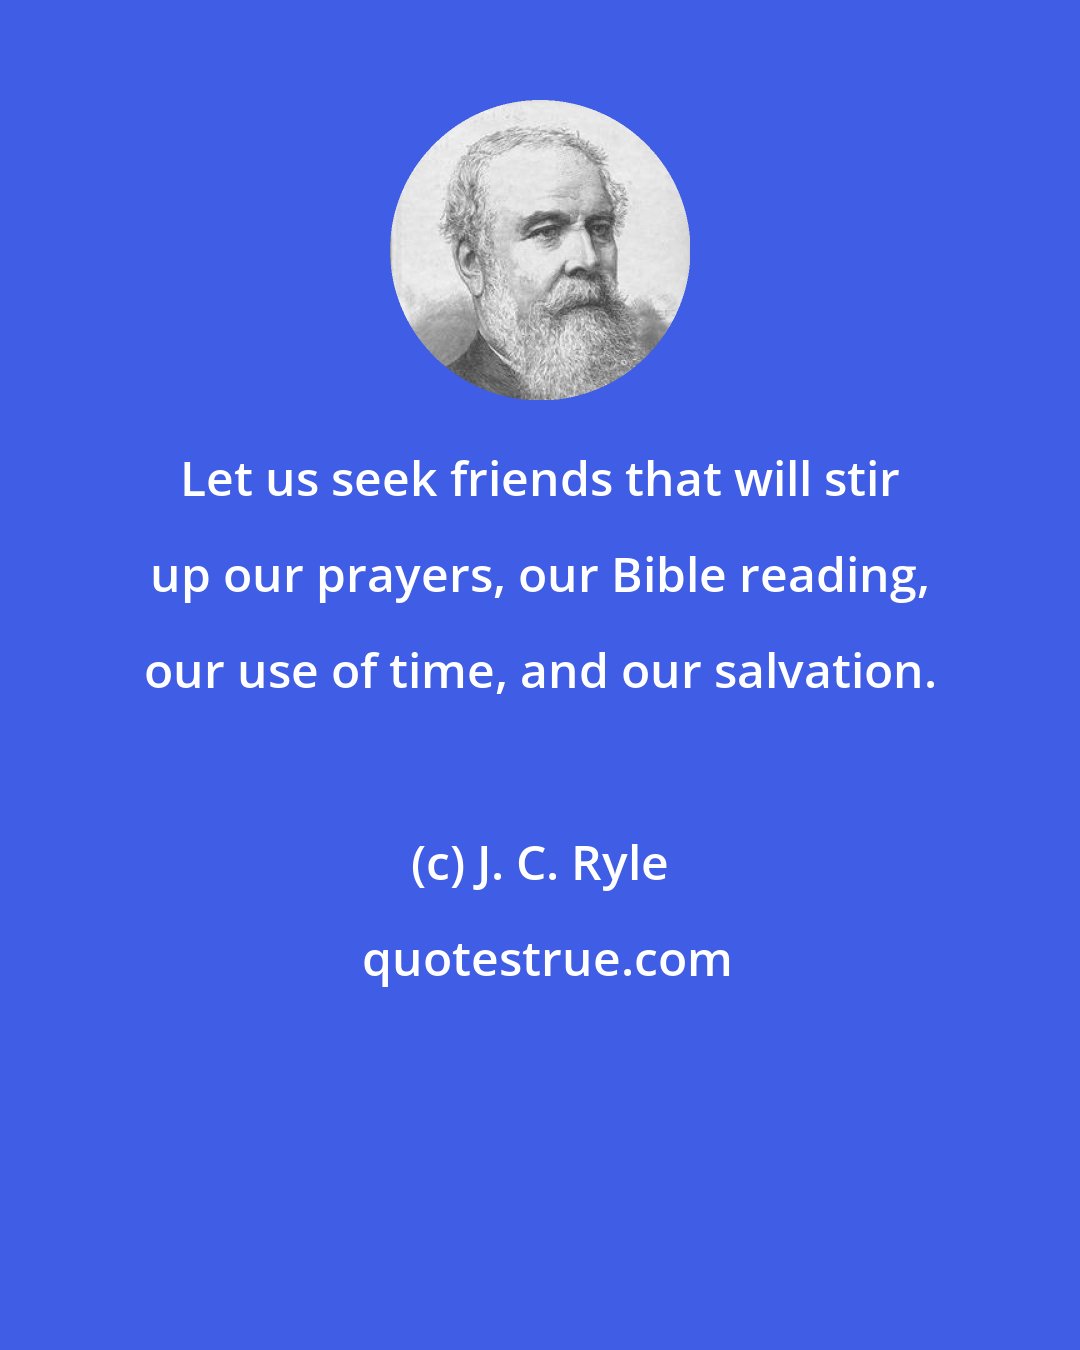 J. C. Ryle: Let us seek friends that will stir up our prayers, our Bible reading, our use of time, and our salvation.